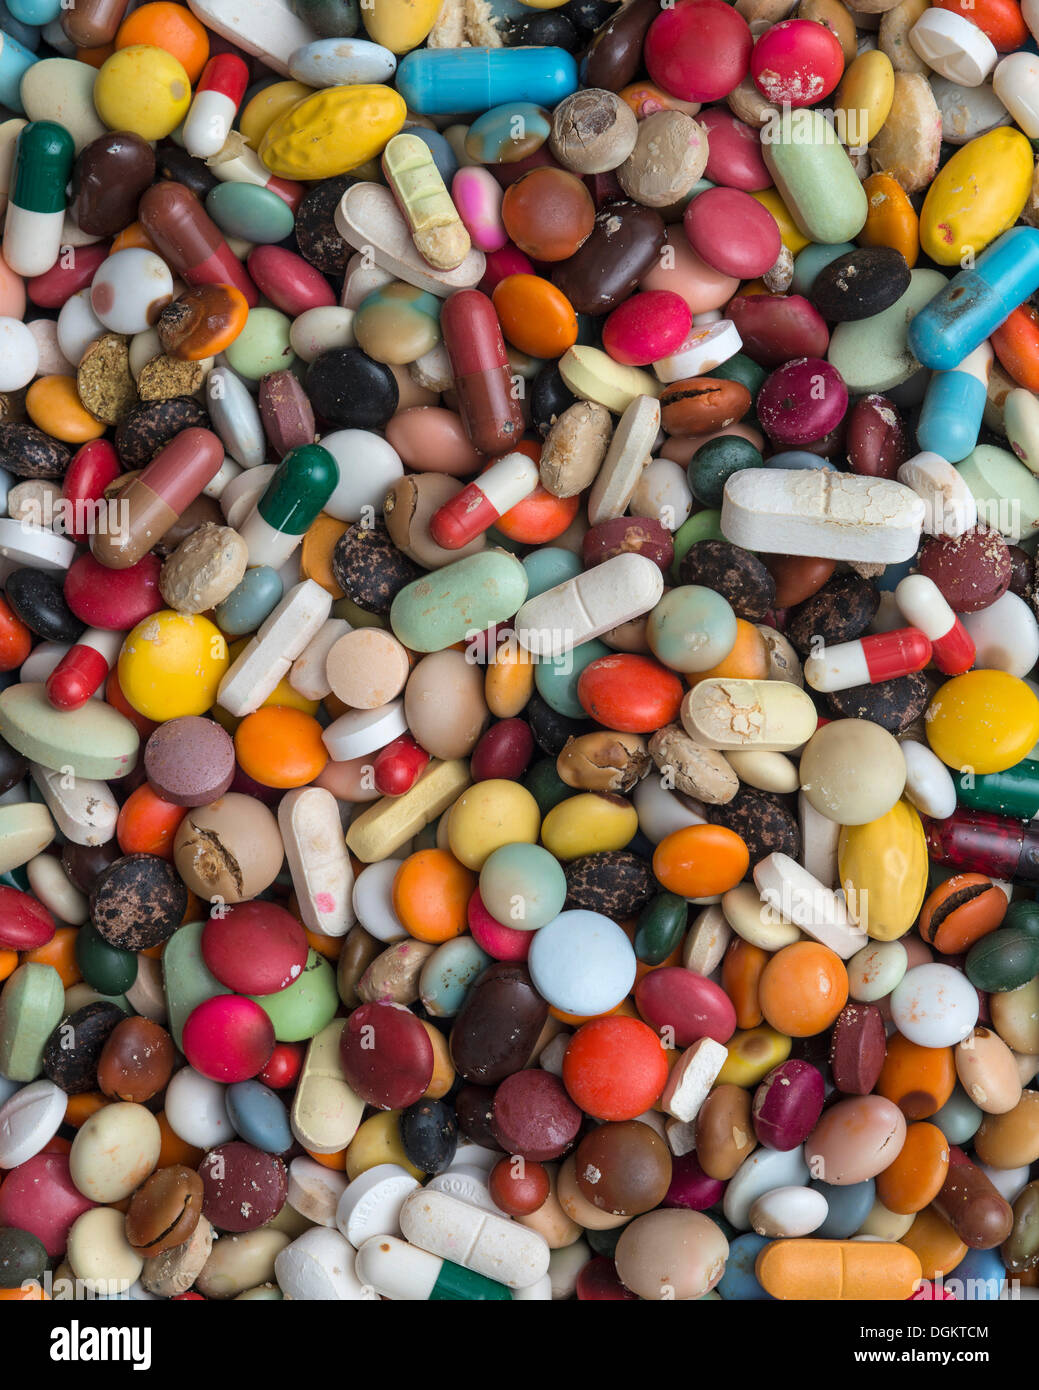 Expired medication, pills, tablets, capsules, dragees, full-frame Stock Photo